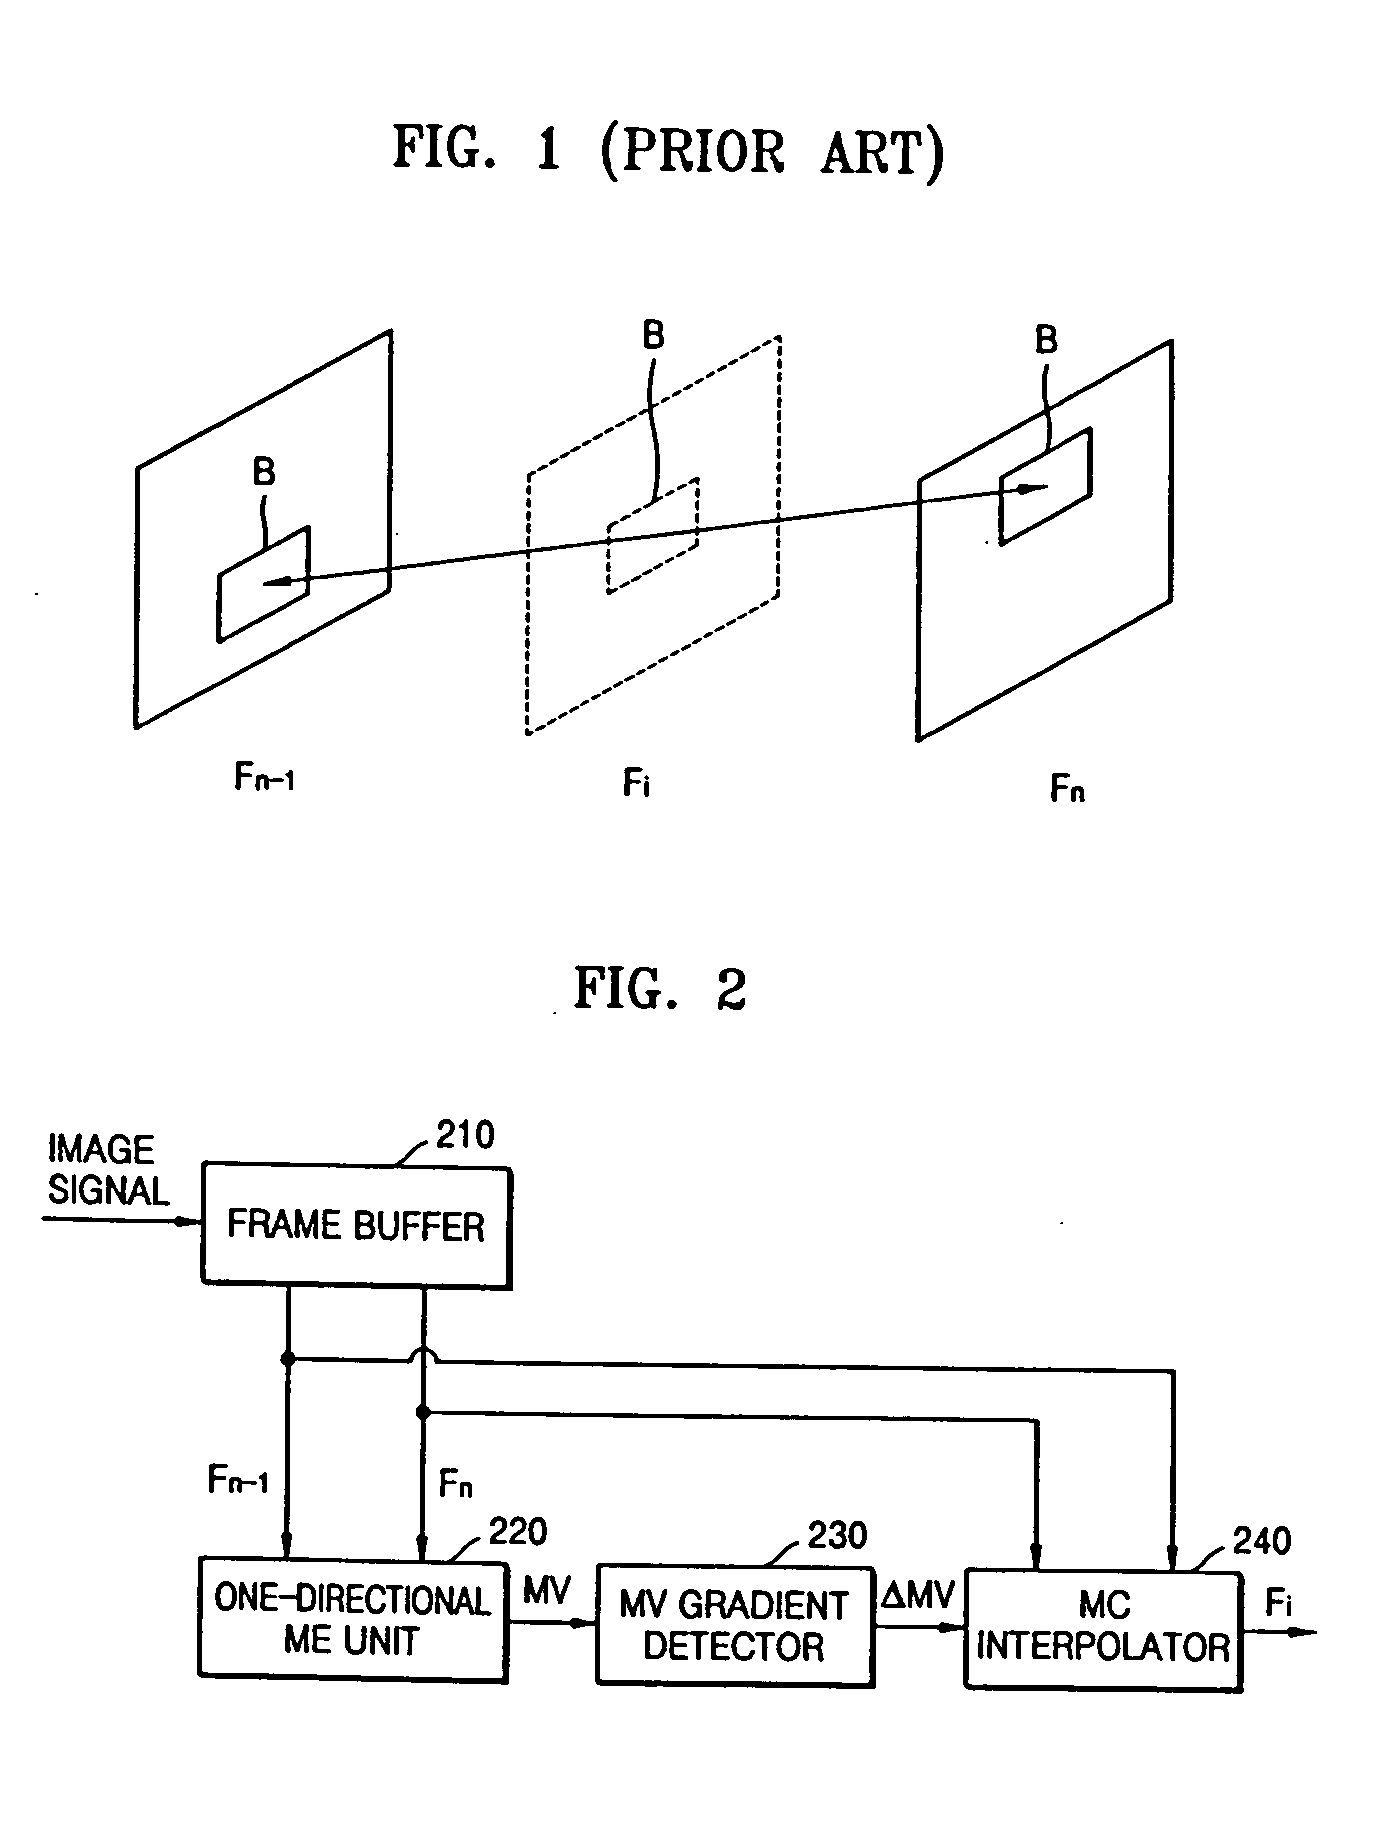 Adaptive motion compensated interpolating method and apparatus